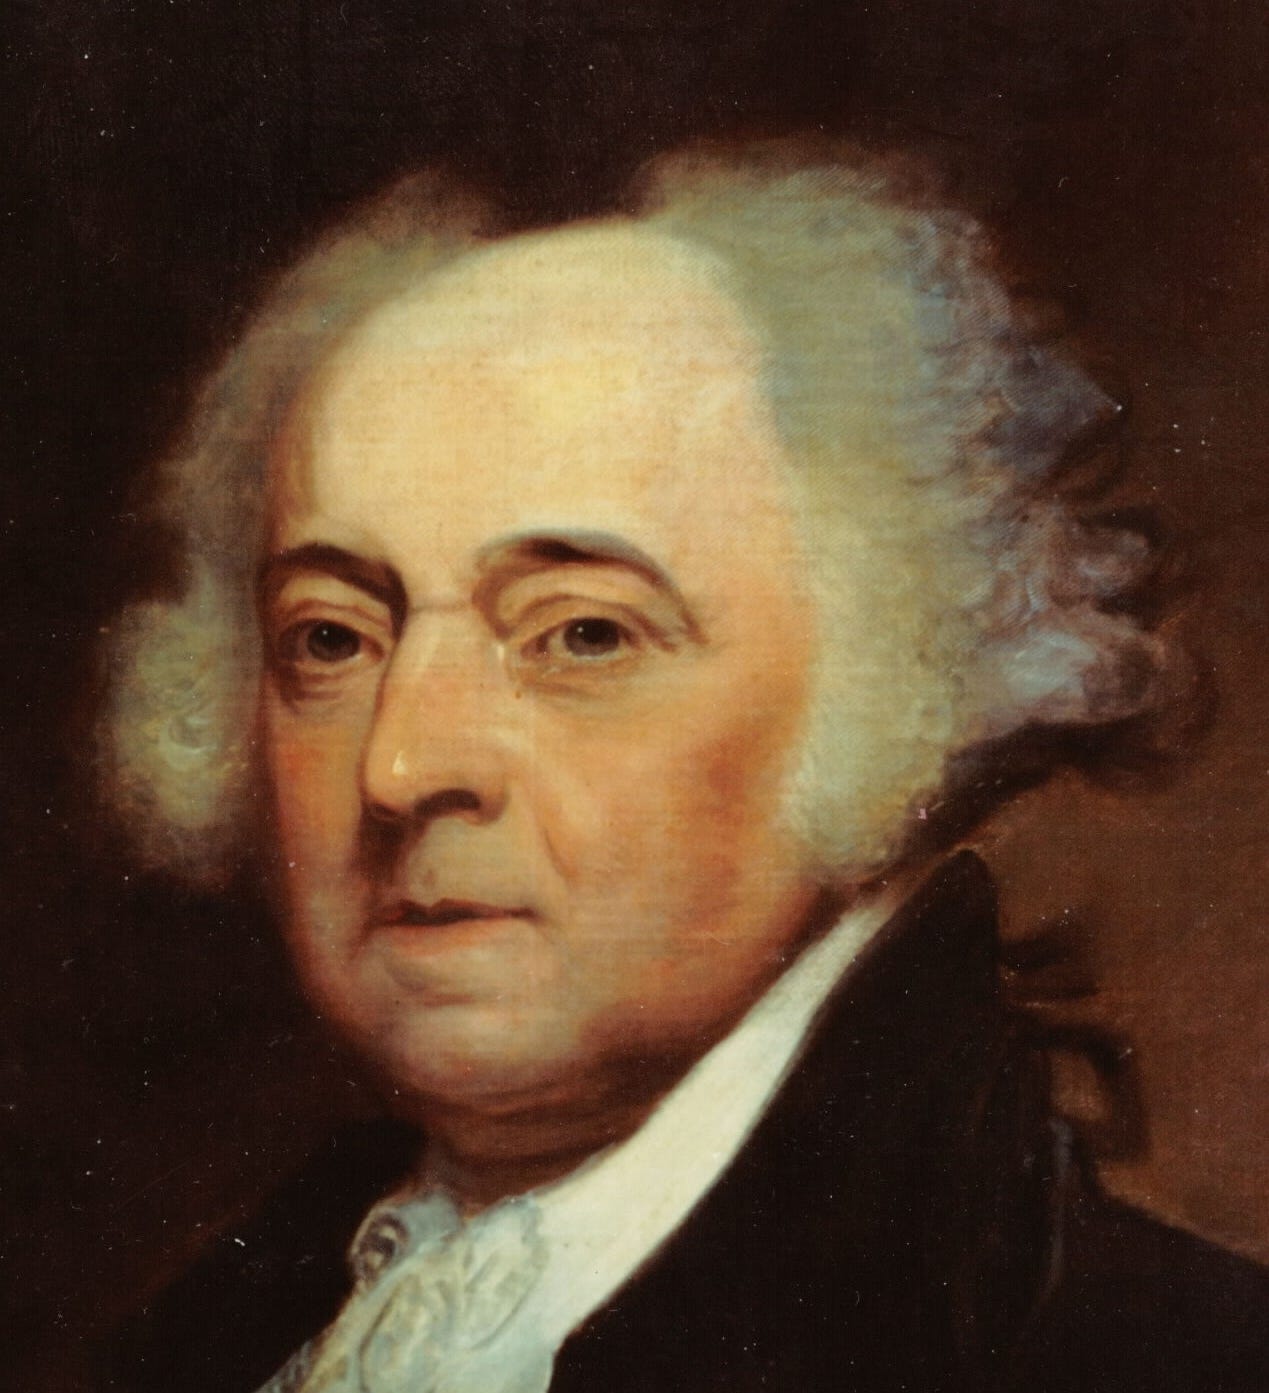 File:US Navy-031029-CLOSEUP-N-6236G-001 A painting of President John Adams  (1735-1826), 2nd president of the United States, by Asher B. Durand  (1767-1845).jpg - Wikimedia Commons